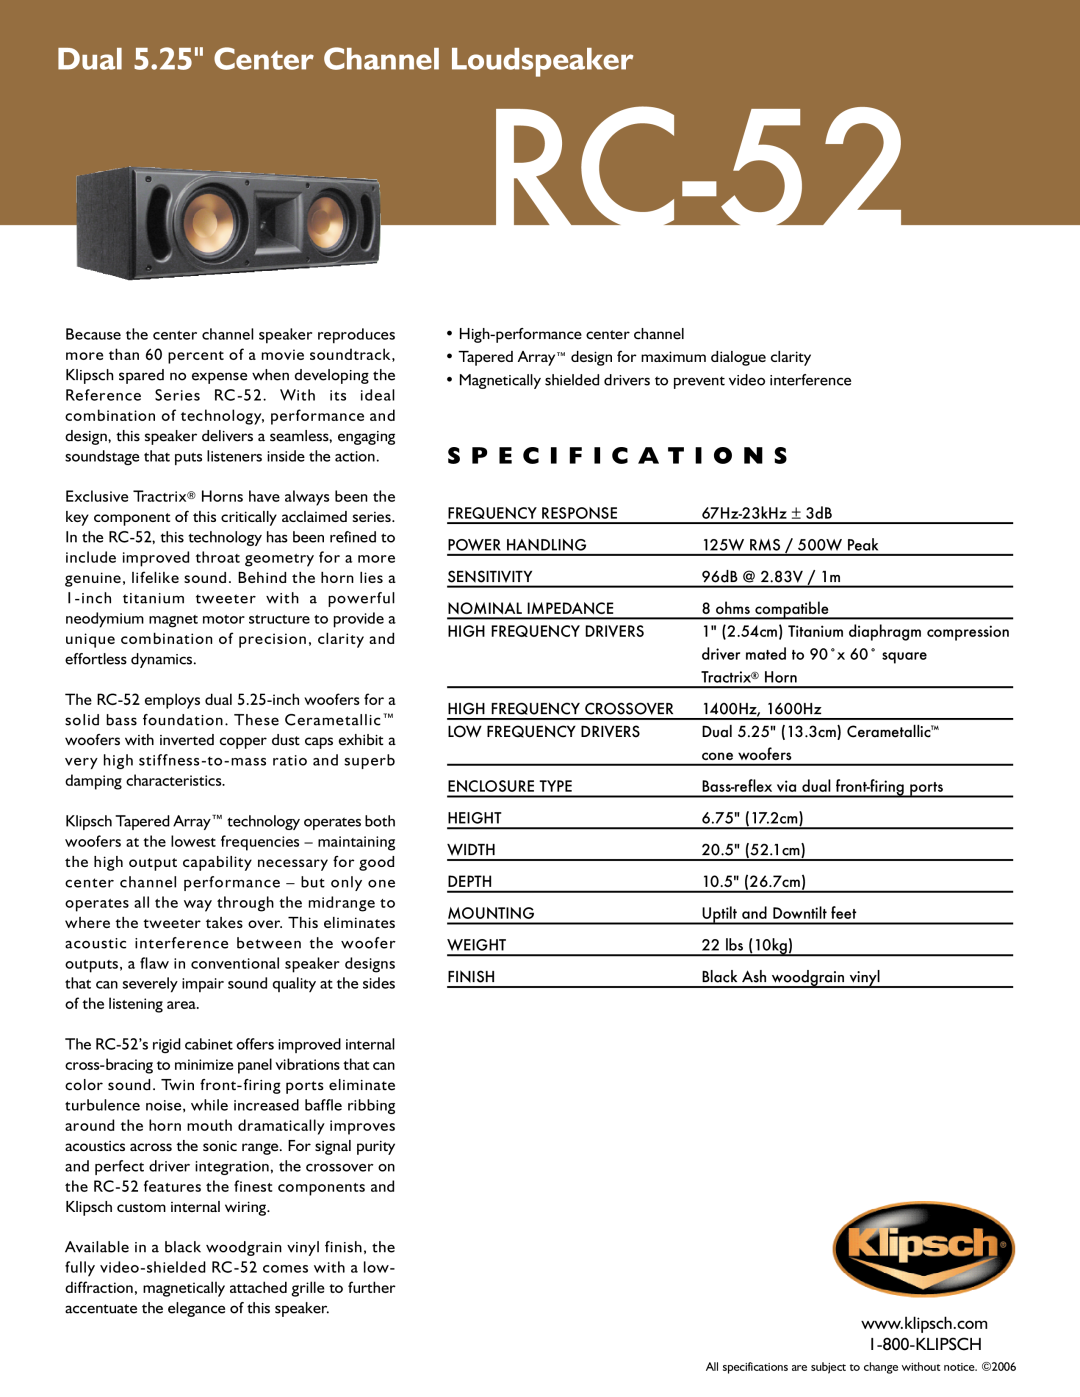 Klipsch RC-52 specifications Dual 5.25 Center Channel Loudspeaker, S P E C I F I C A T I O N S 